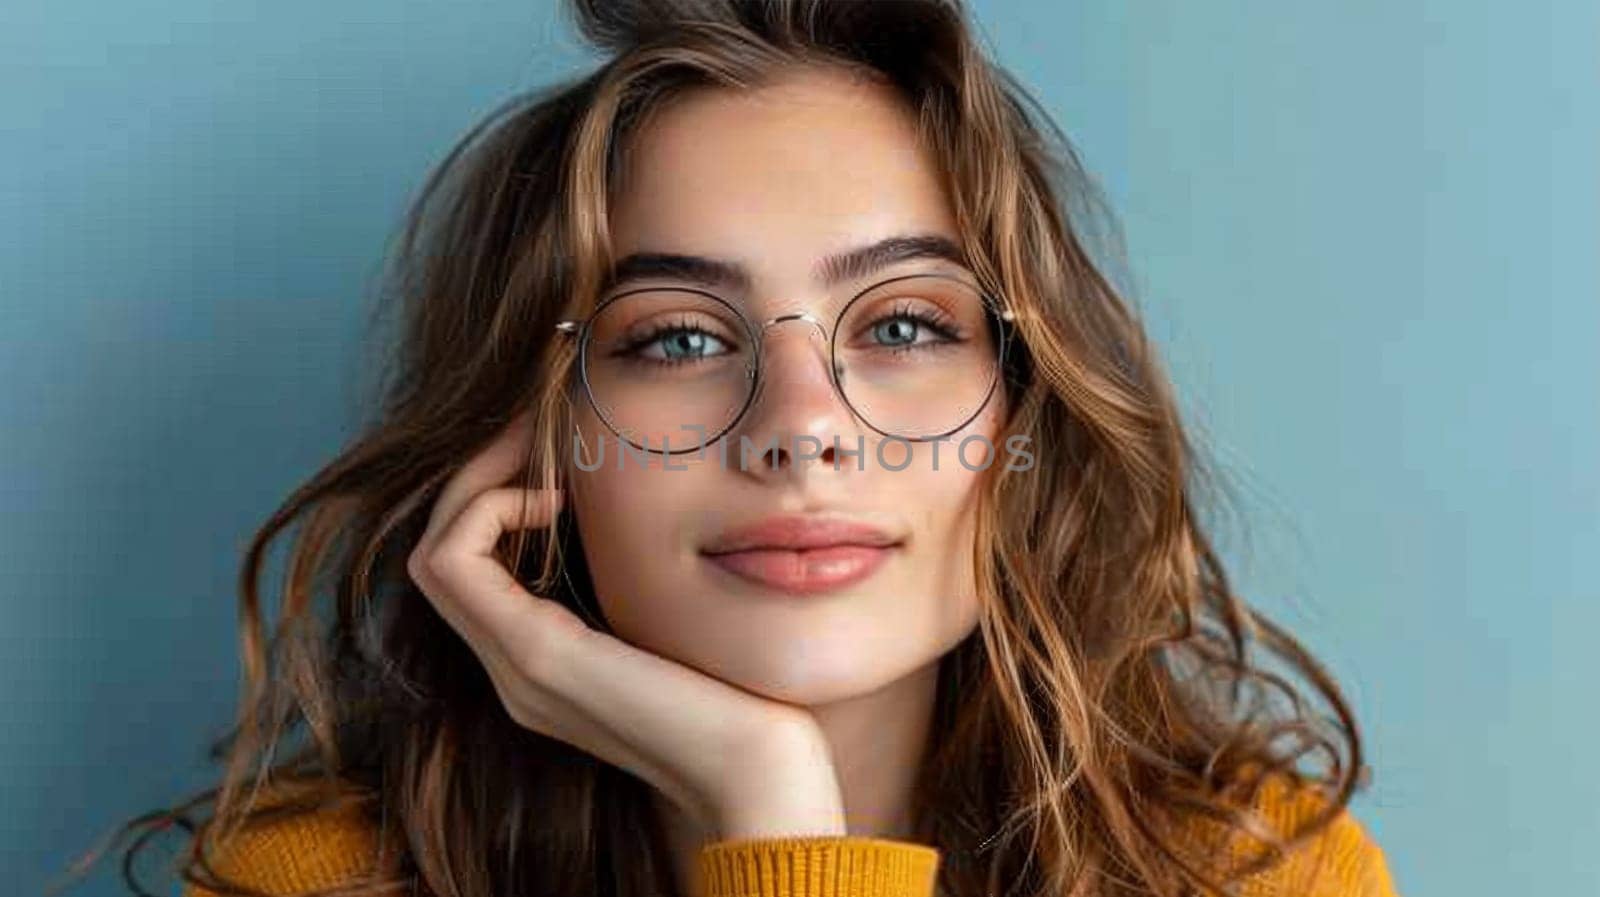 A woman with glasses posing for a picture